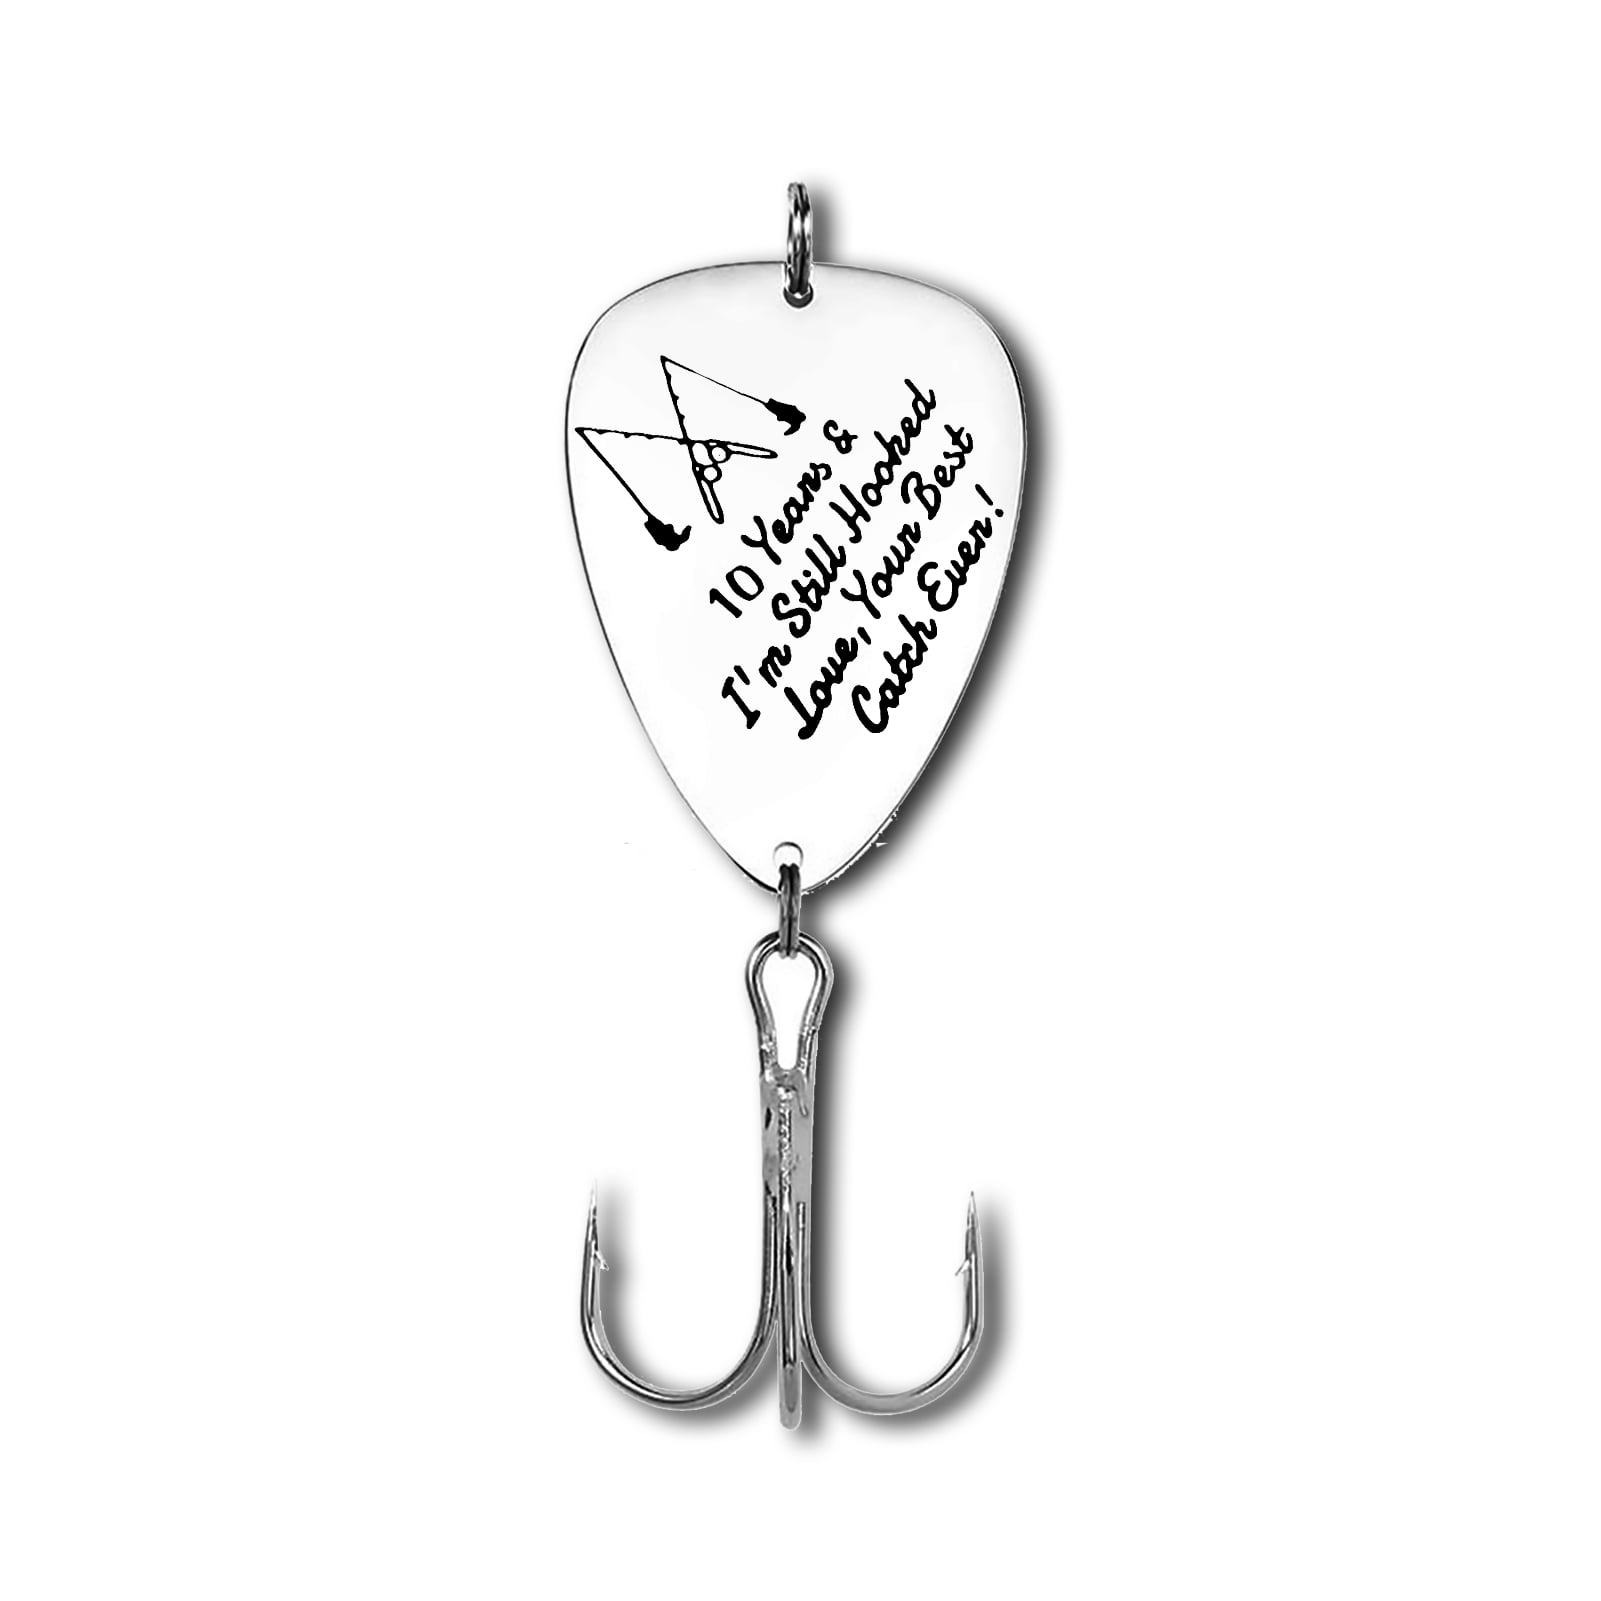 10th Anniversary Gifts For Him Men Fishing Lure Gifts Fisherman